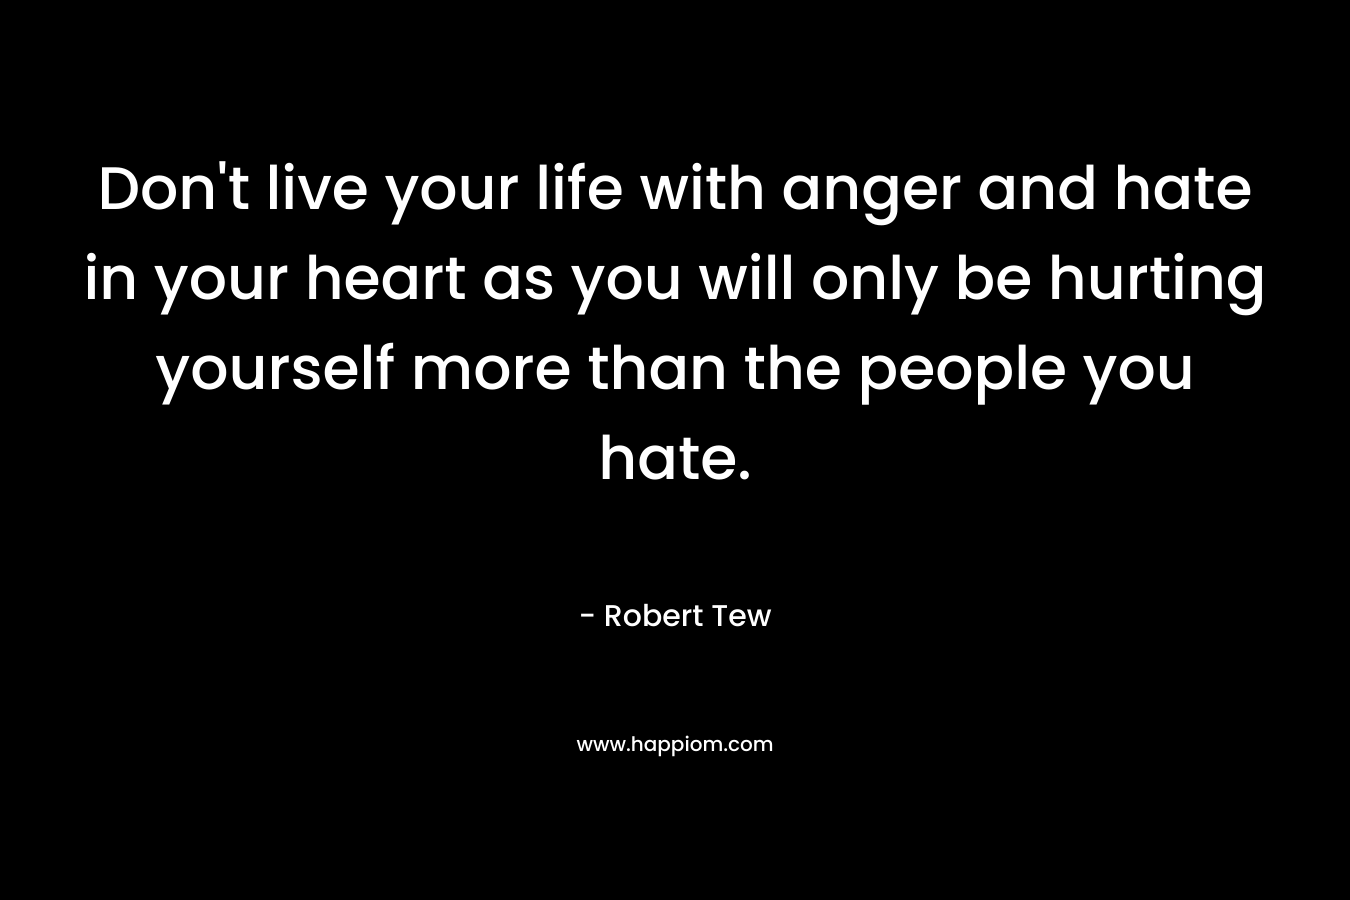 Don't live your life with anger and hate in your heart as you will only be hurting yourself more than the people you hate.